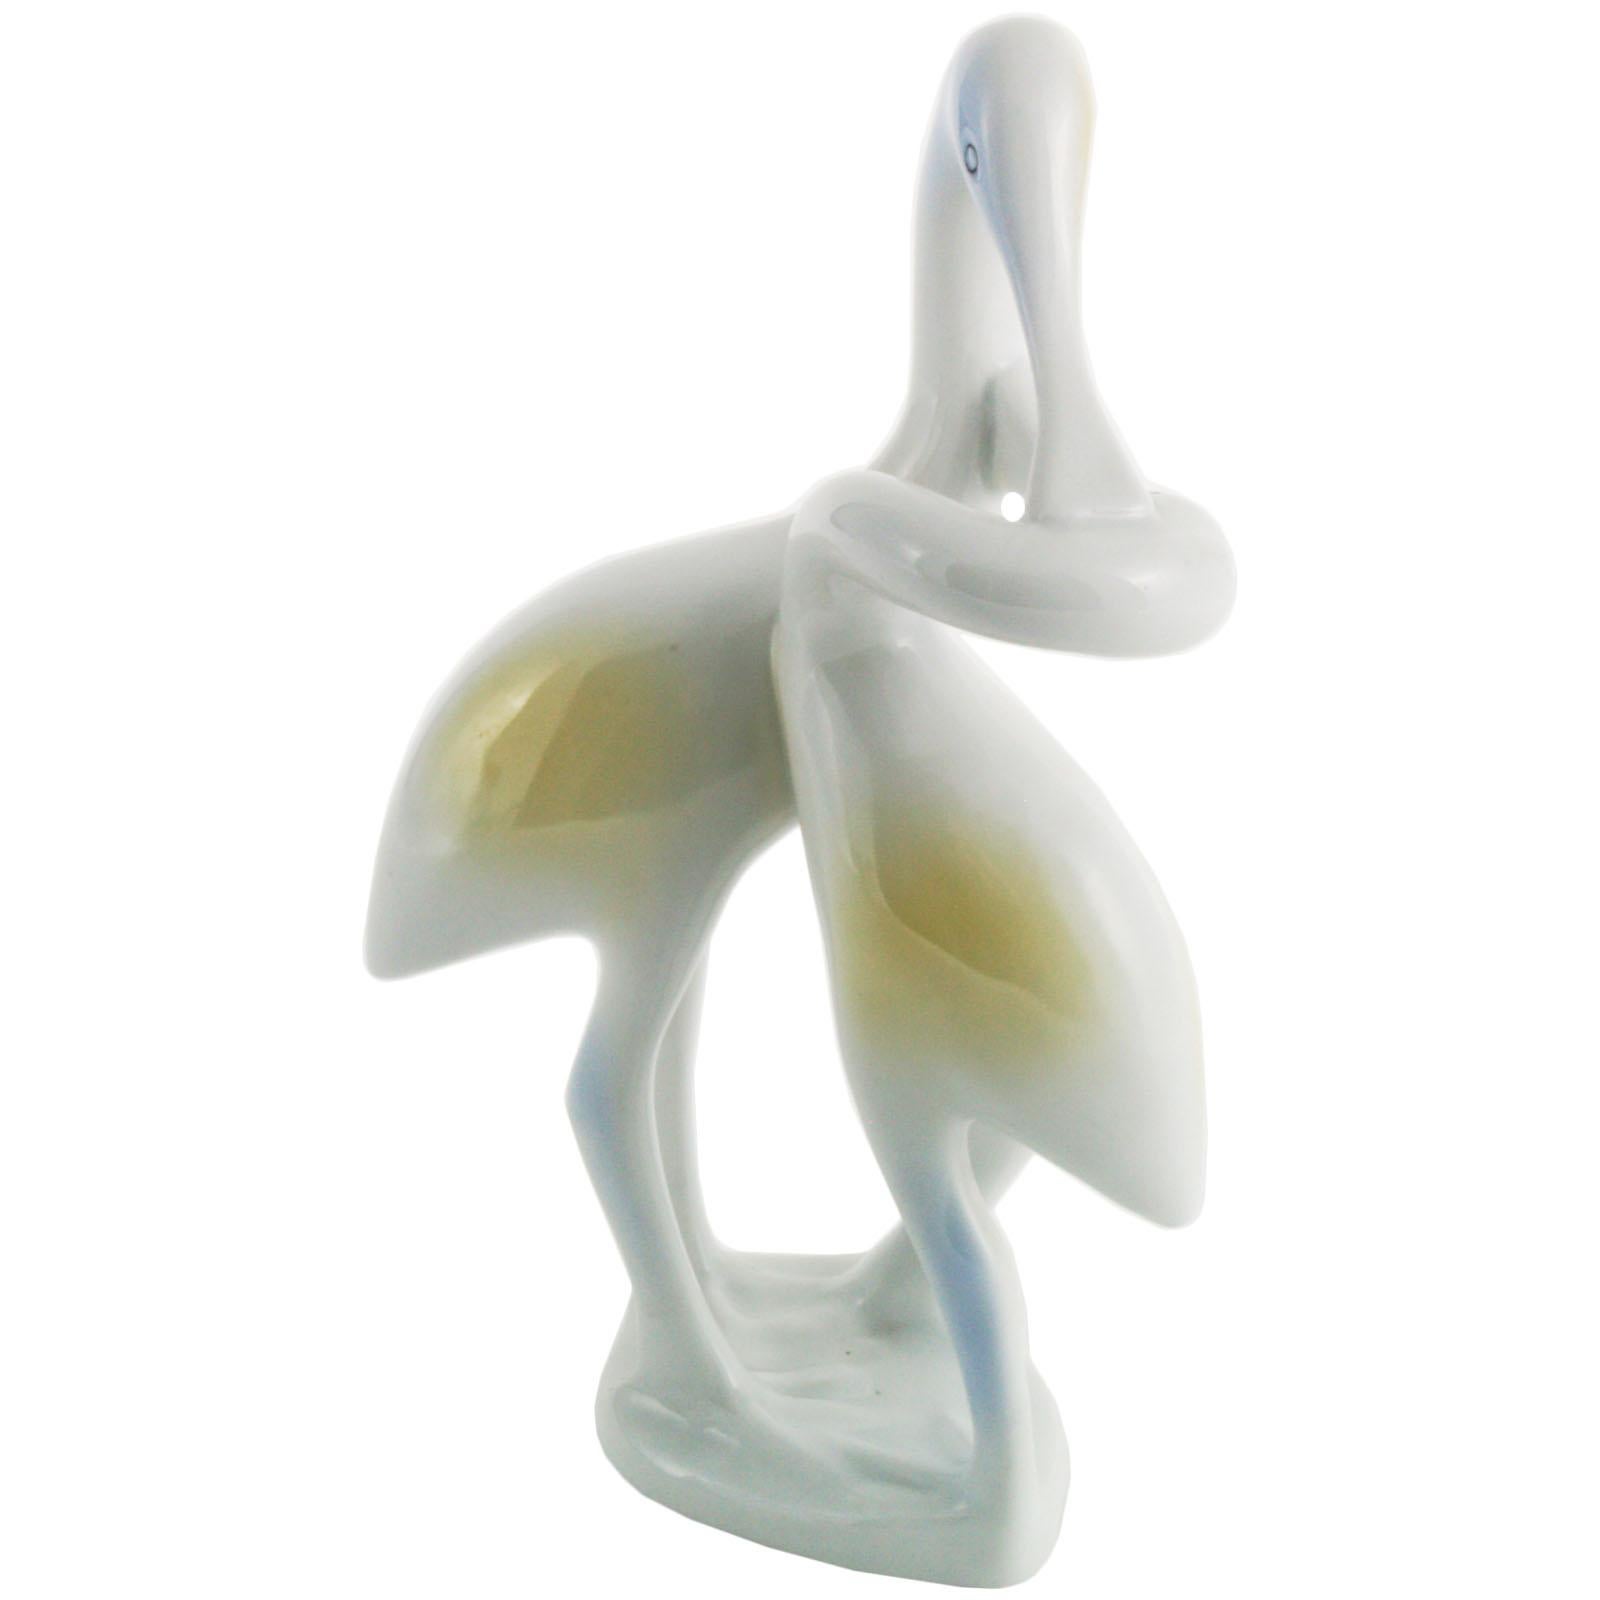  Art Deco Hungarian Porcelain Statuette Swans Couple by Holloaza  In Good Condition For Sale In Vigonza, Padua